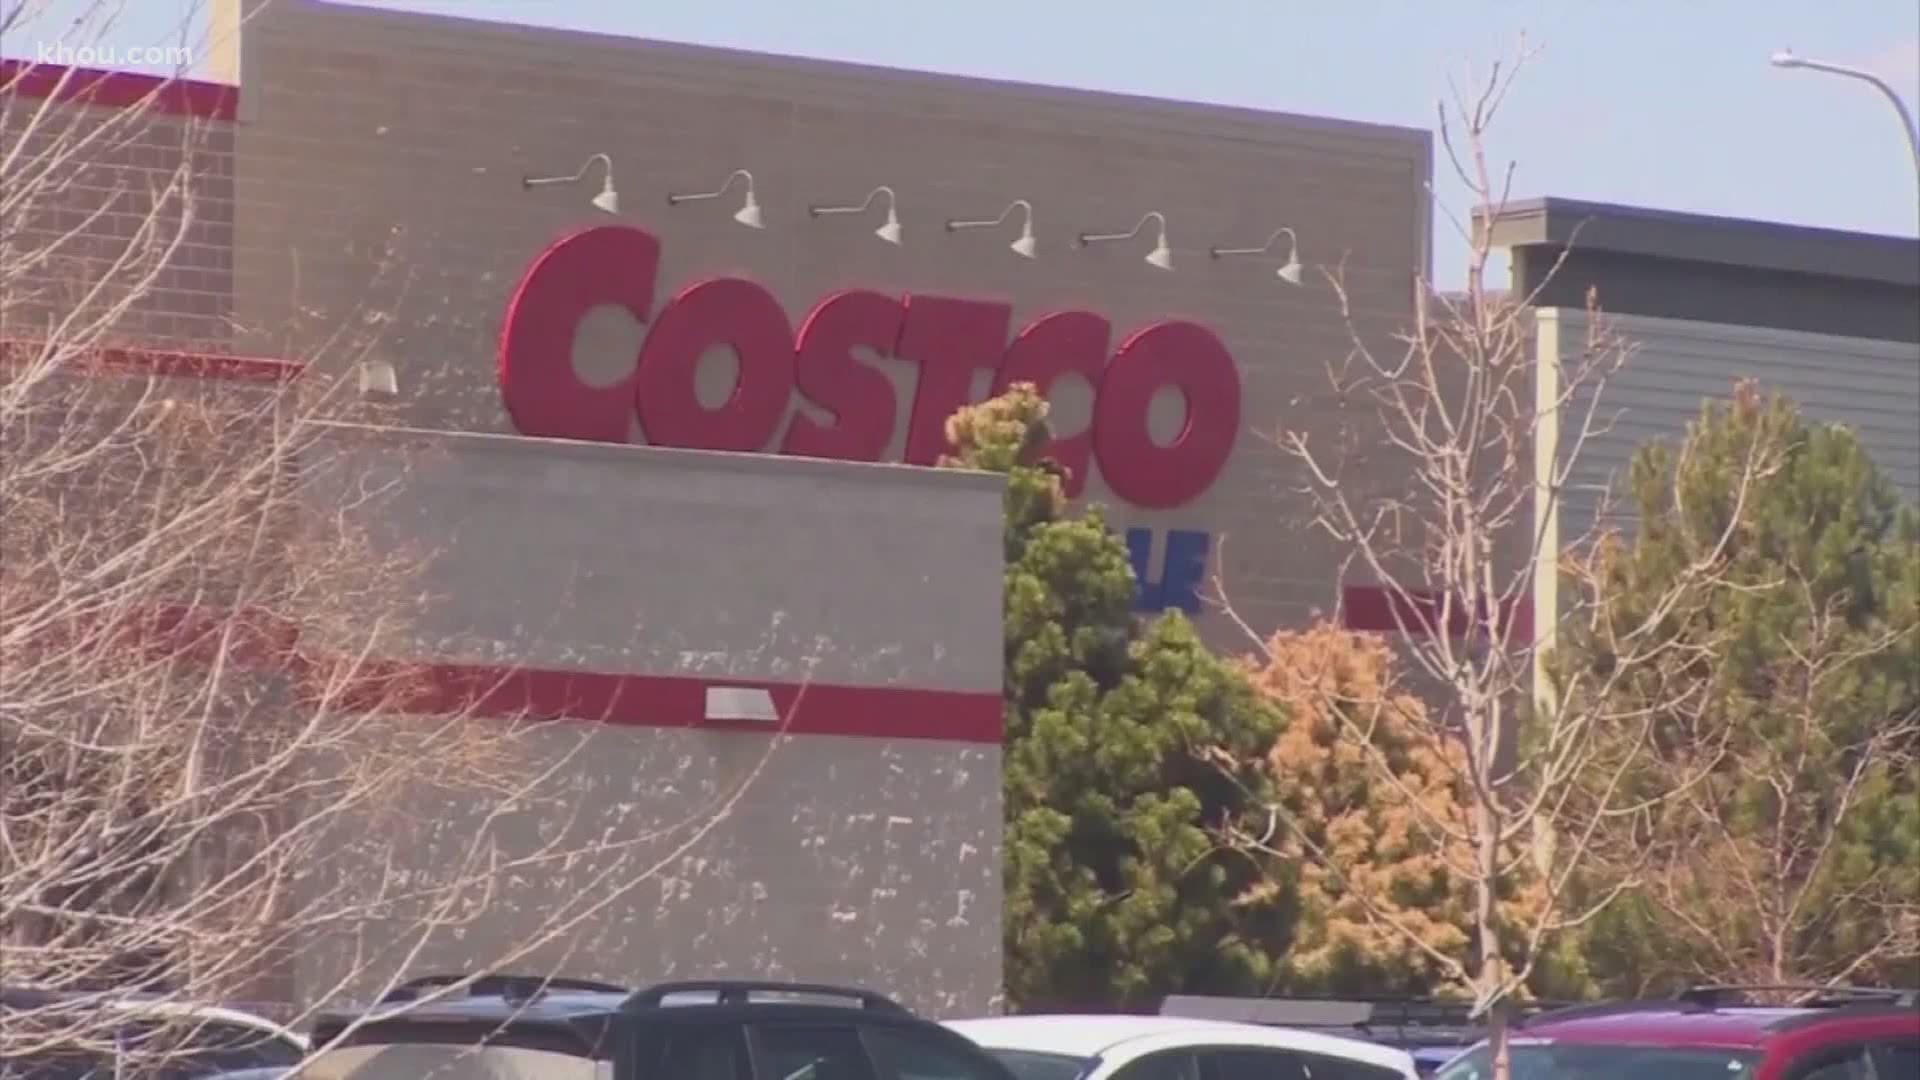 According to an animal rights group, two Costco shareholders filed a lawsuit against the company saying it violates state laws against livestock neglect.